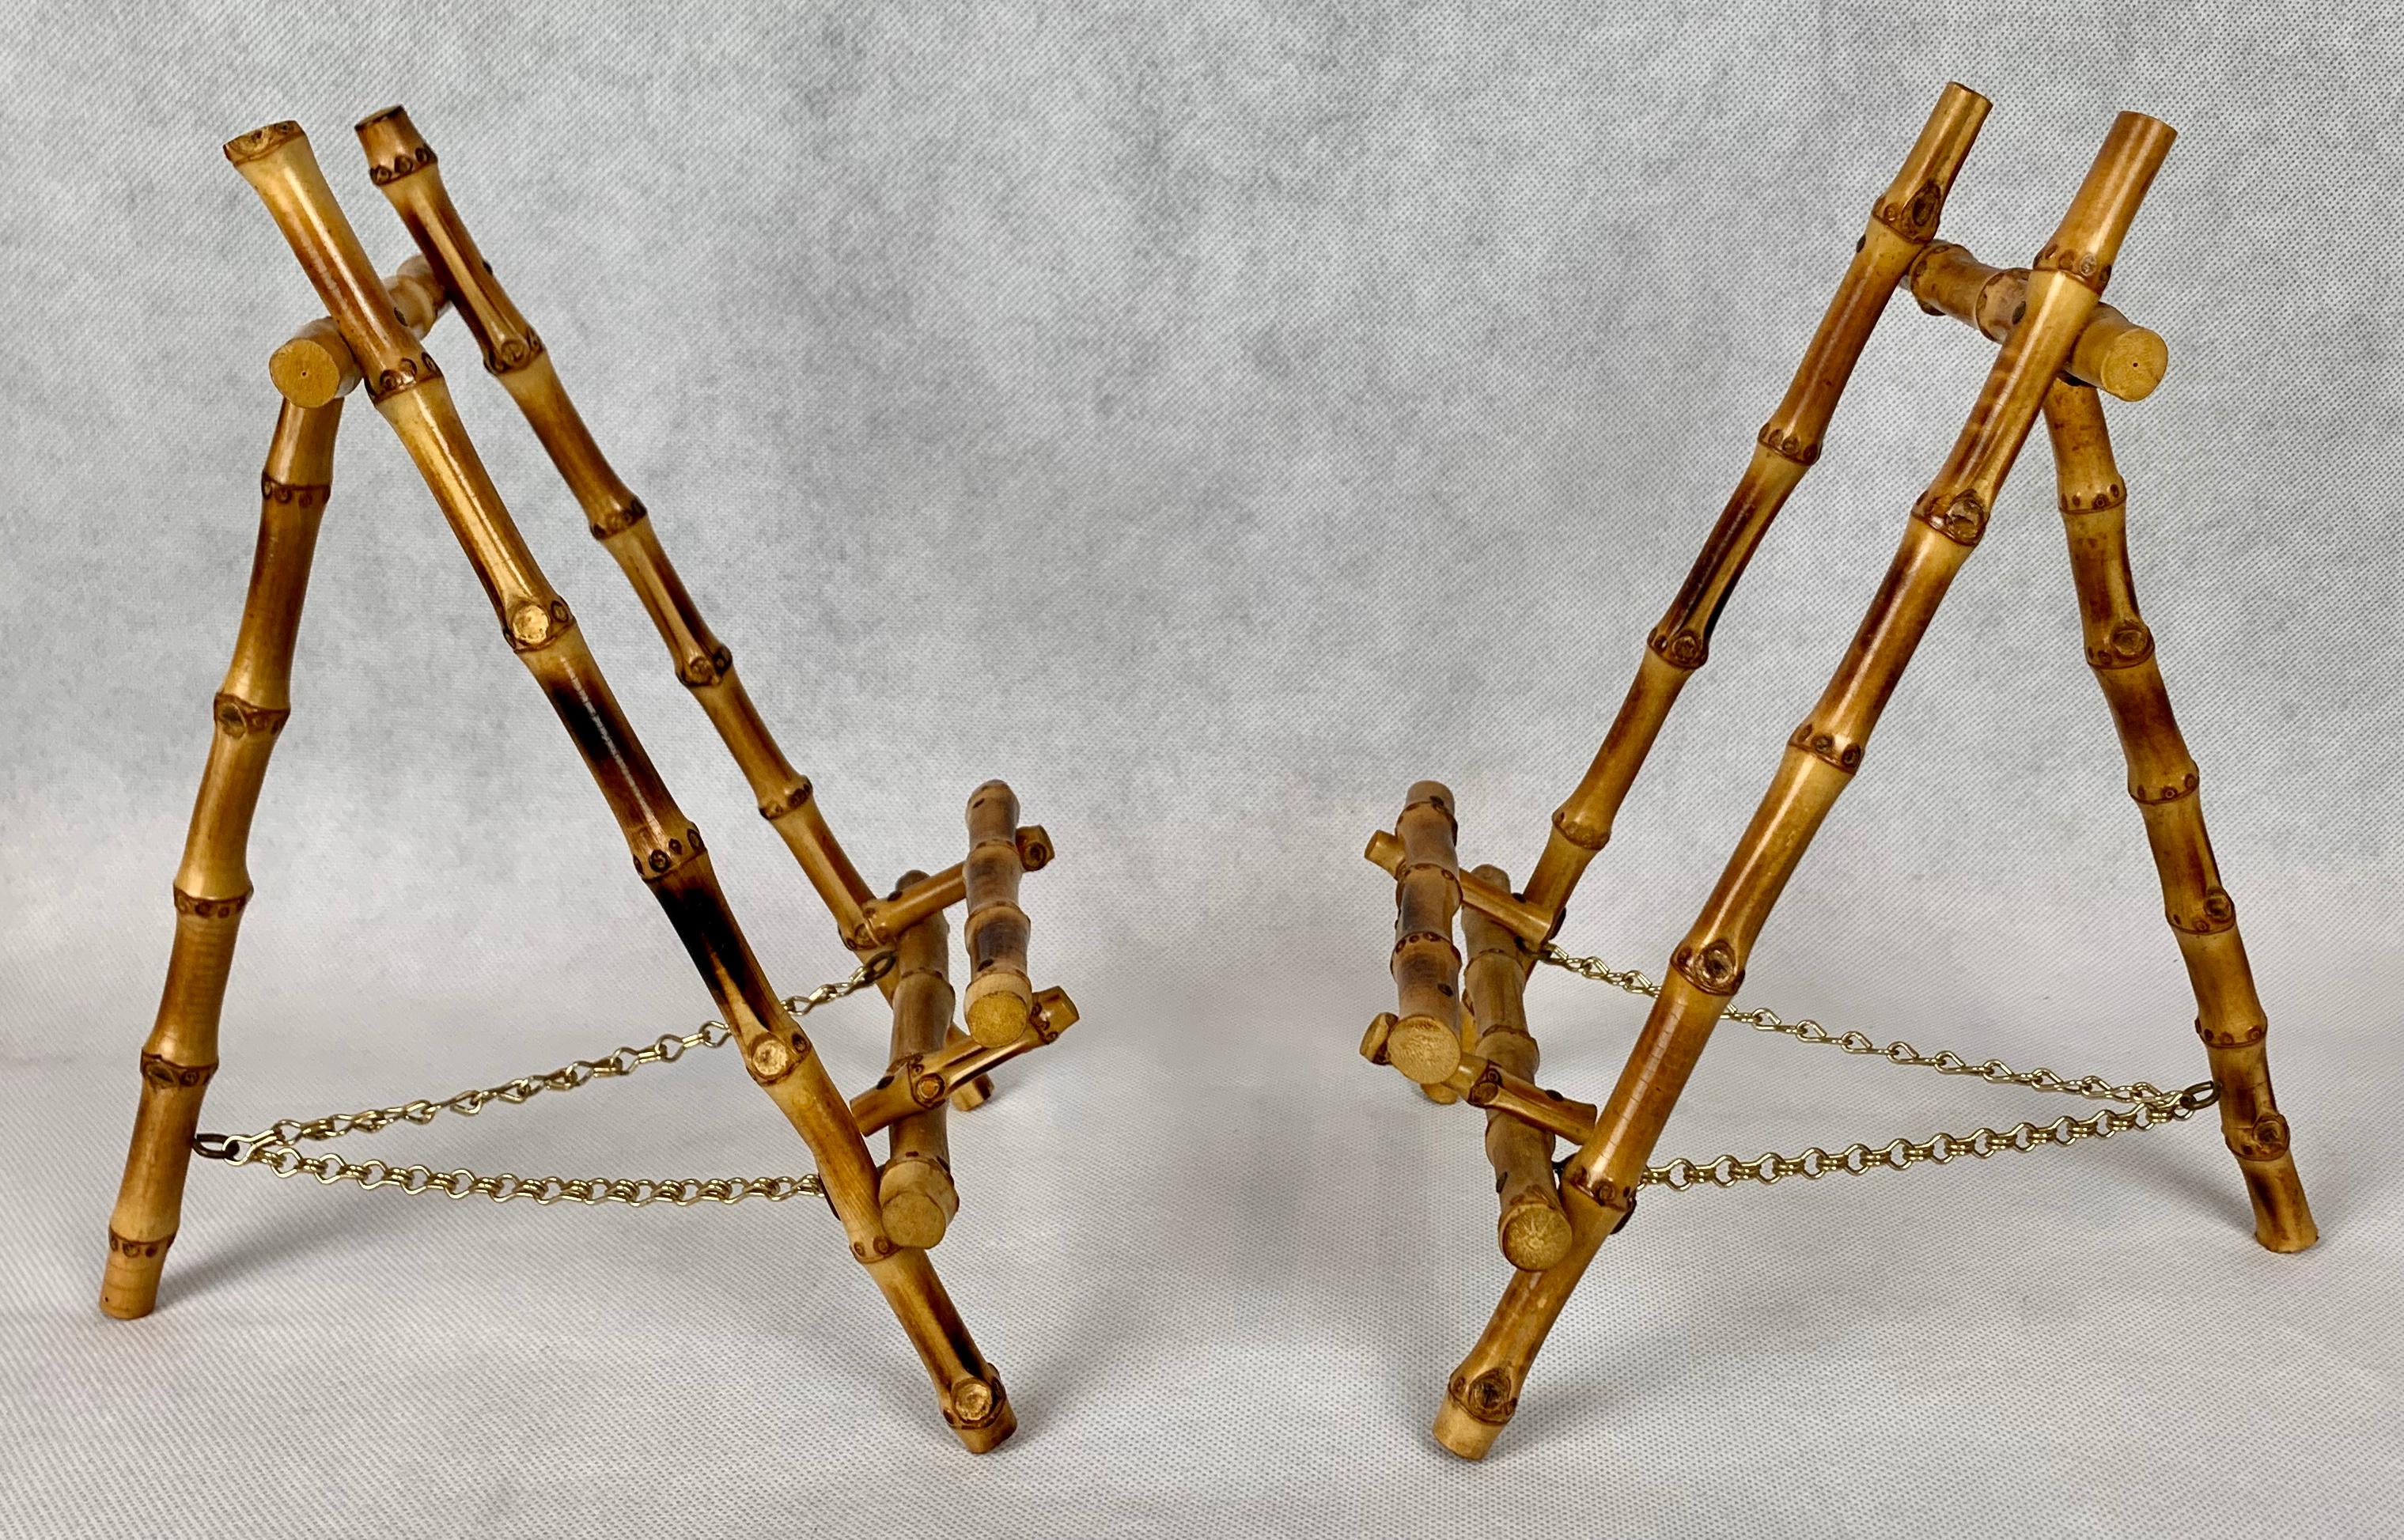 Edwardian Pair of Midcentury Bamboo Easels with Brass Chains